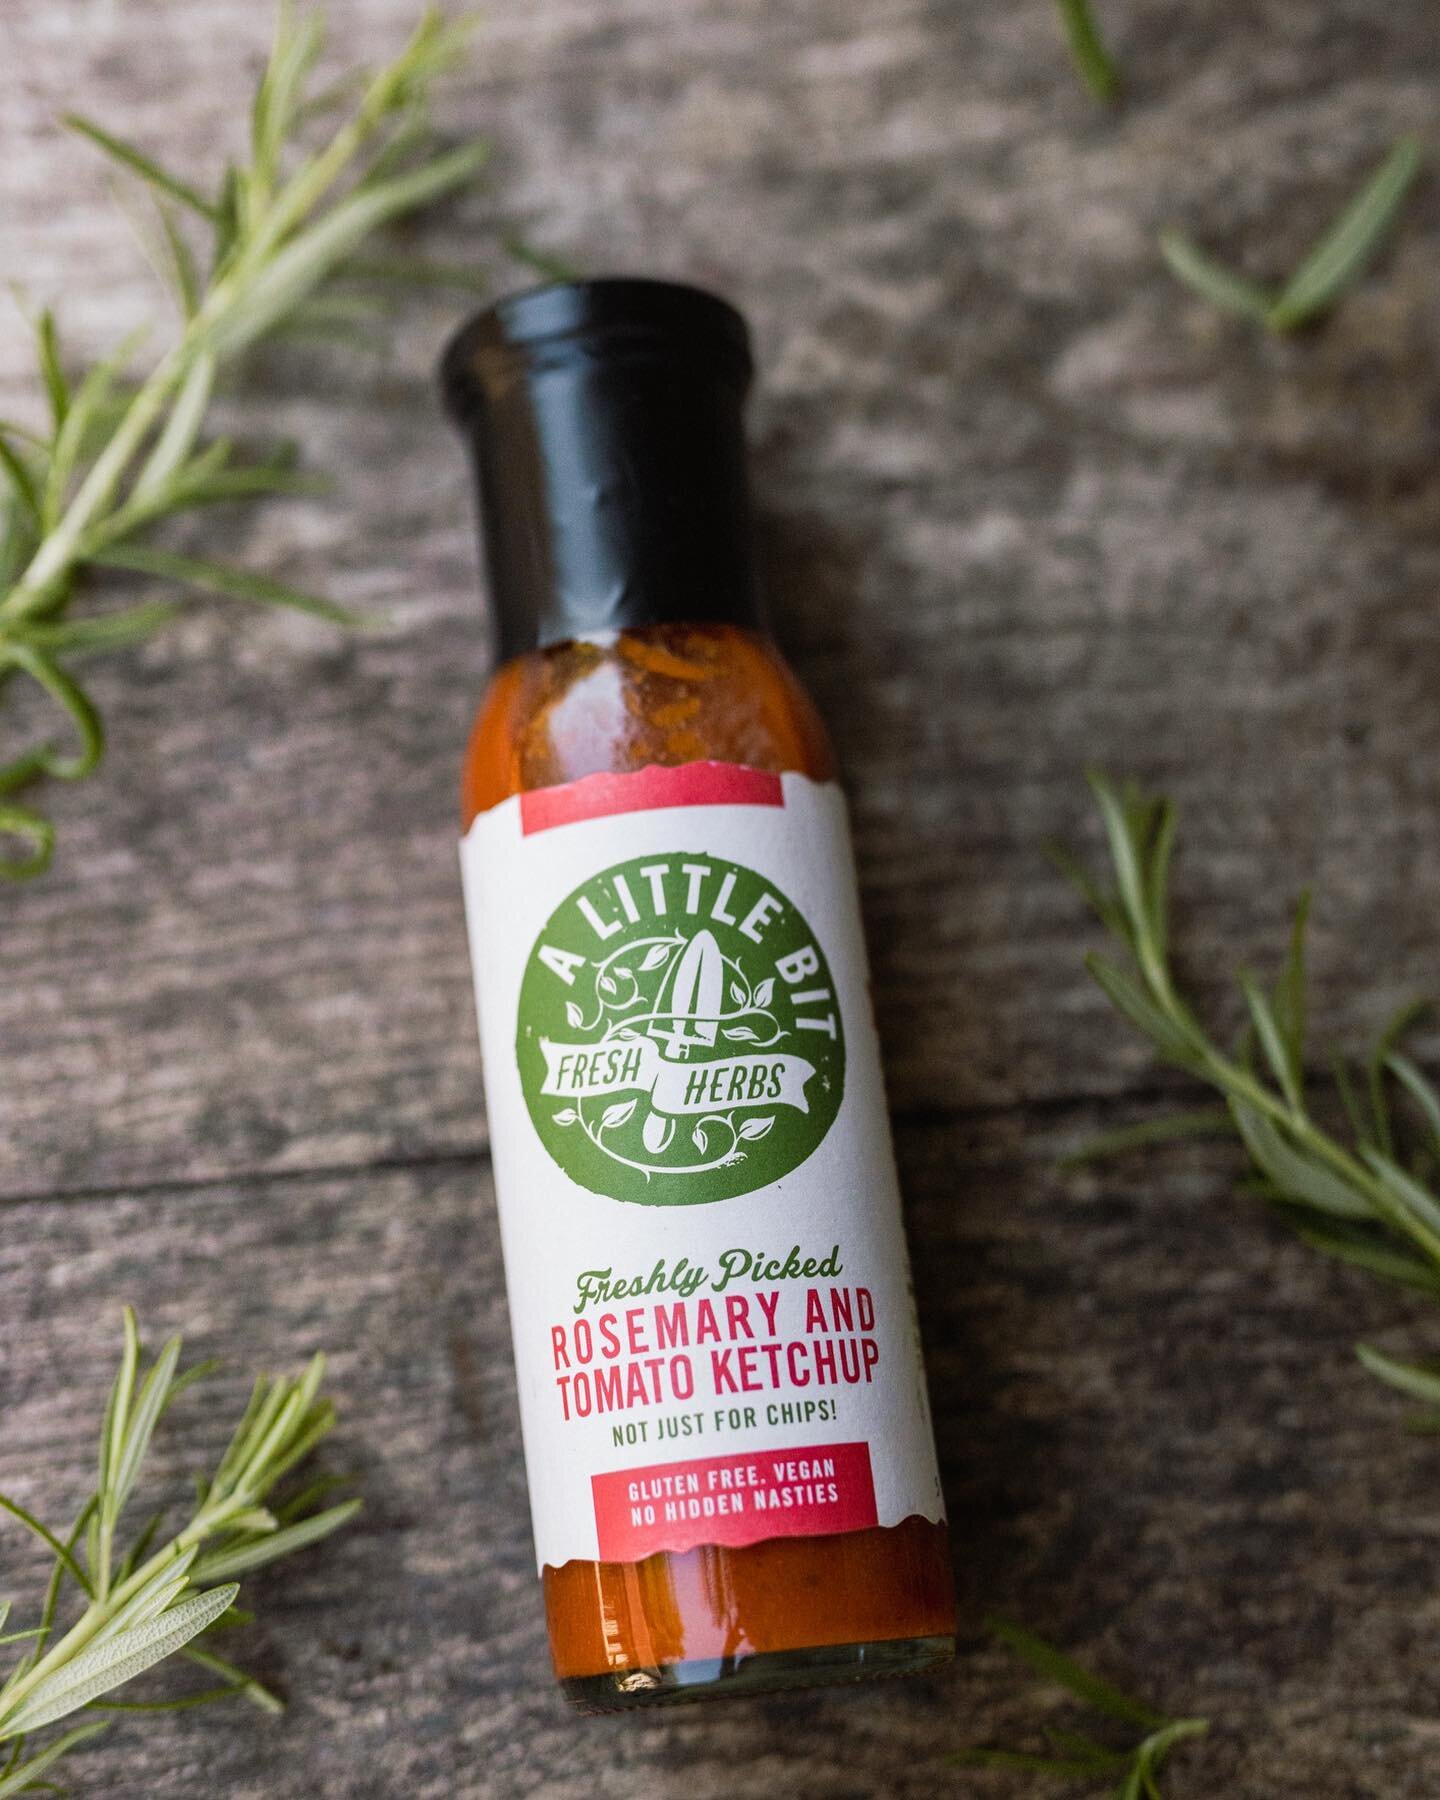 Let's Ket'chup. Did you know? Our Rosemary and Tomato Ketchup is made using fresh herbs! 

This sauce is 'a little bit' exciting, as not only it is packed full of goodness, it's also incredibly versatile. Dip your chips, add to your sausage sarnie or